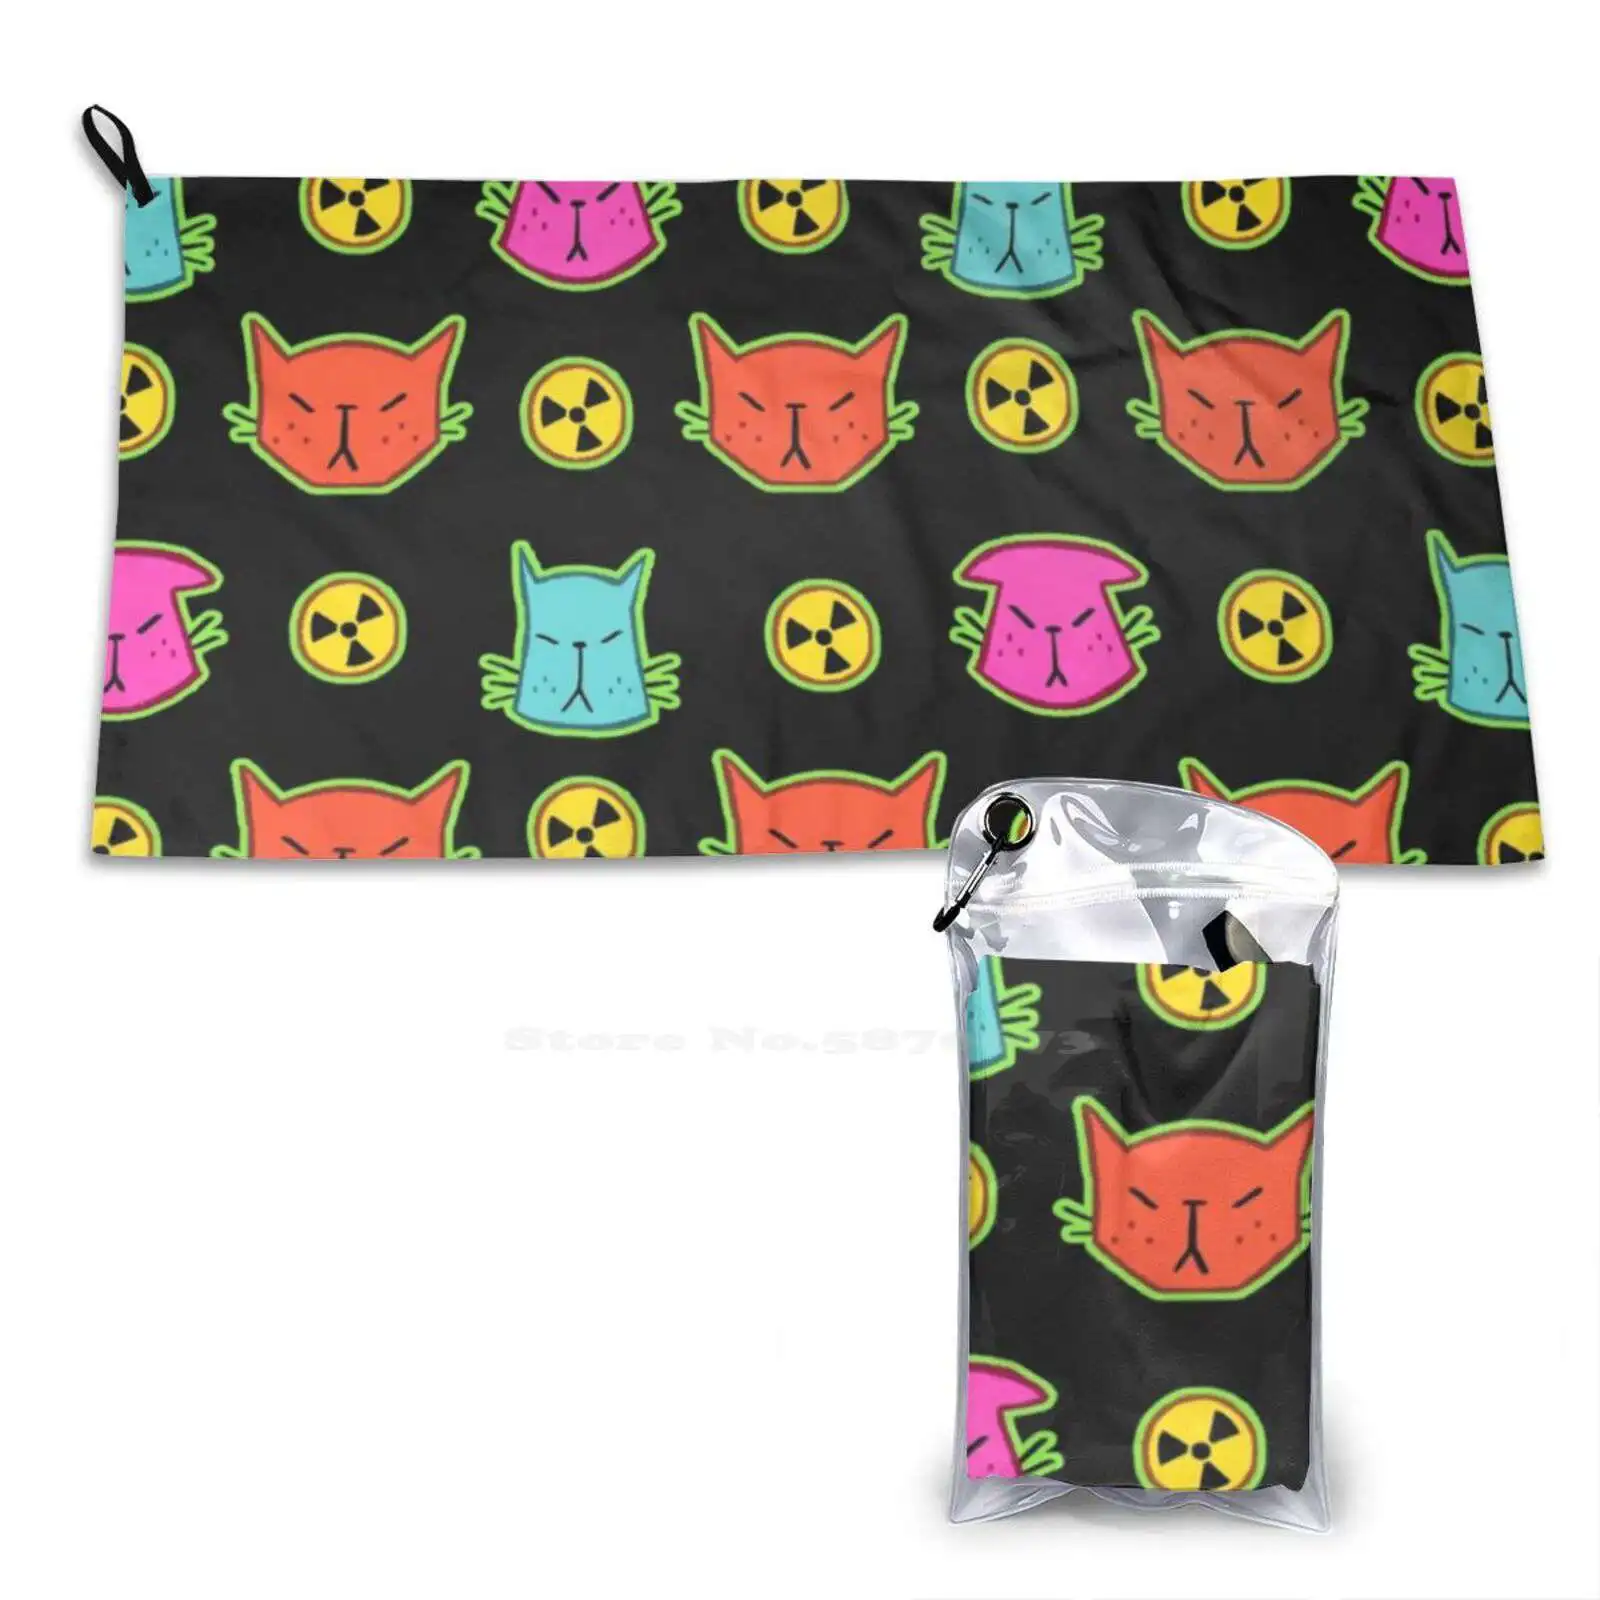 Nuclear Cats Quick Dry Beach Towel Microfiber Bath Towels Nuclear Cats Adamsketches Stephasocks Doodledate Youtube Kitty